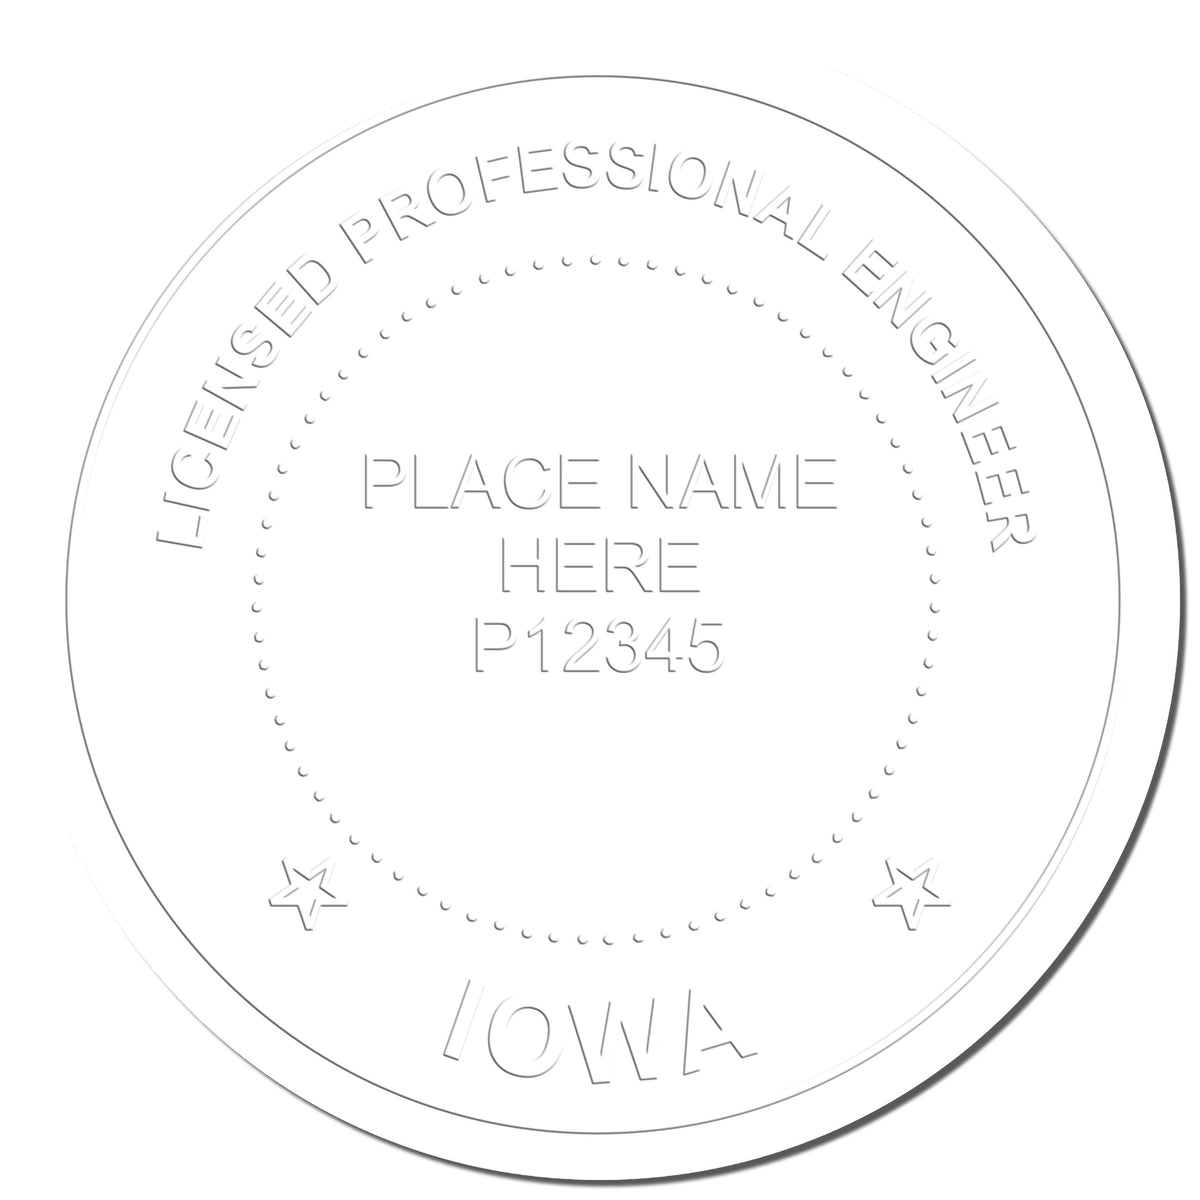 The Soft Iowa Professional Engineer Seal stamp impression comes to life with a crisp, detailed photo on paper - showcasing true professional quality.